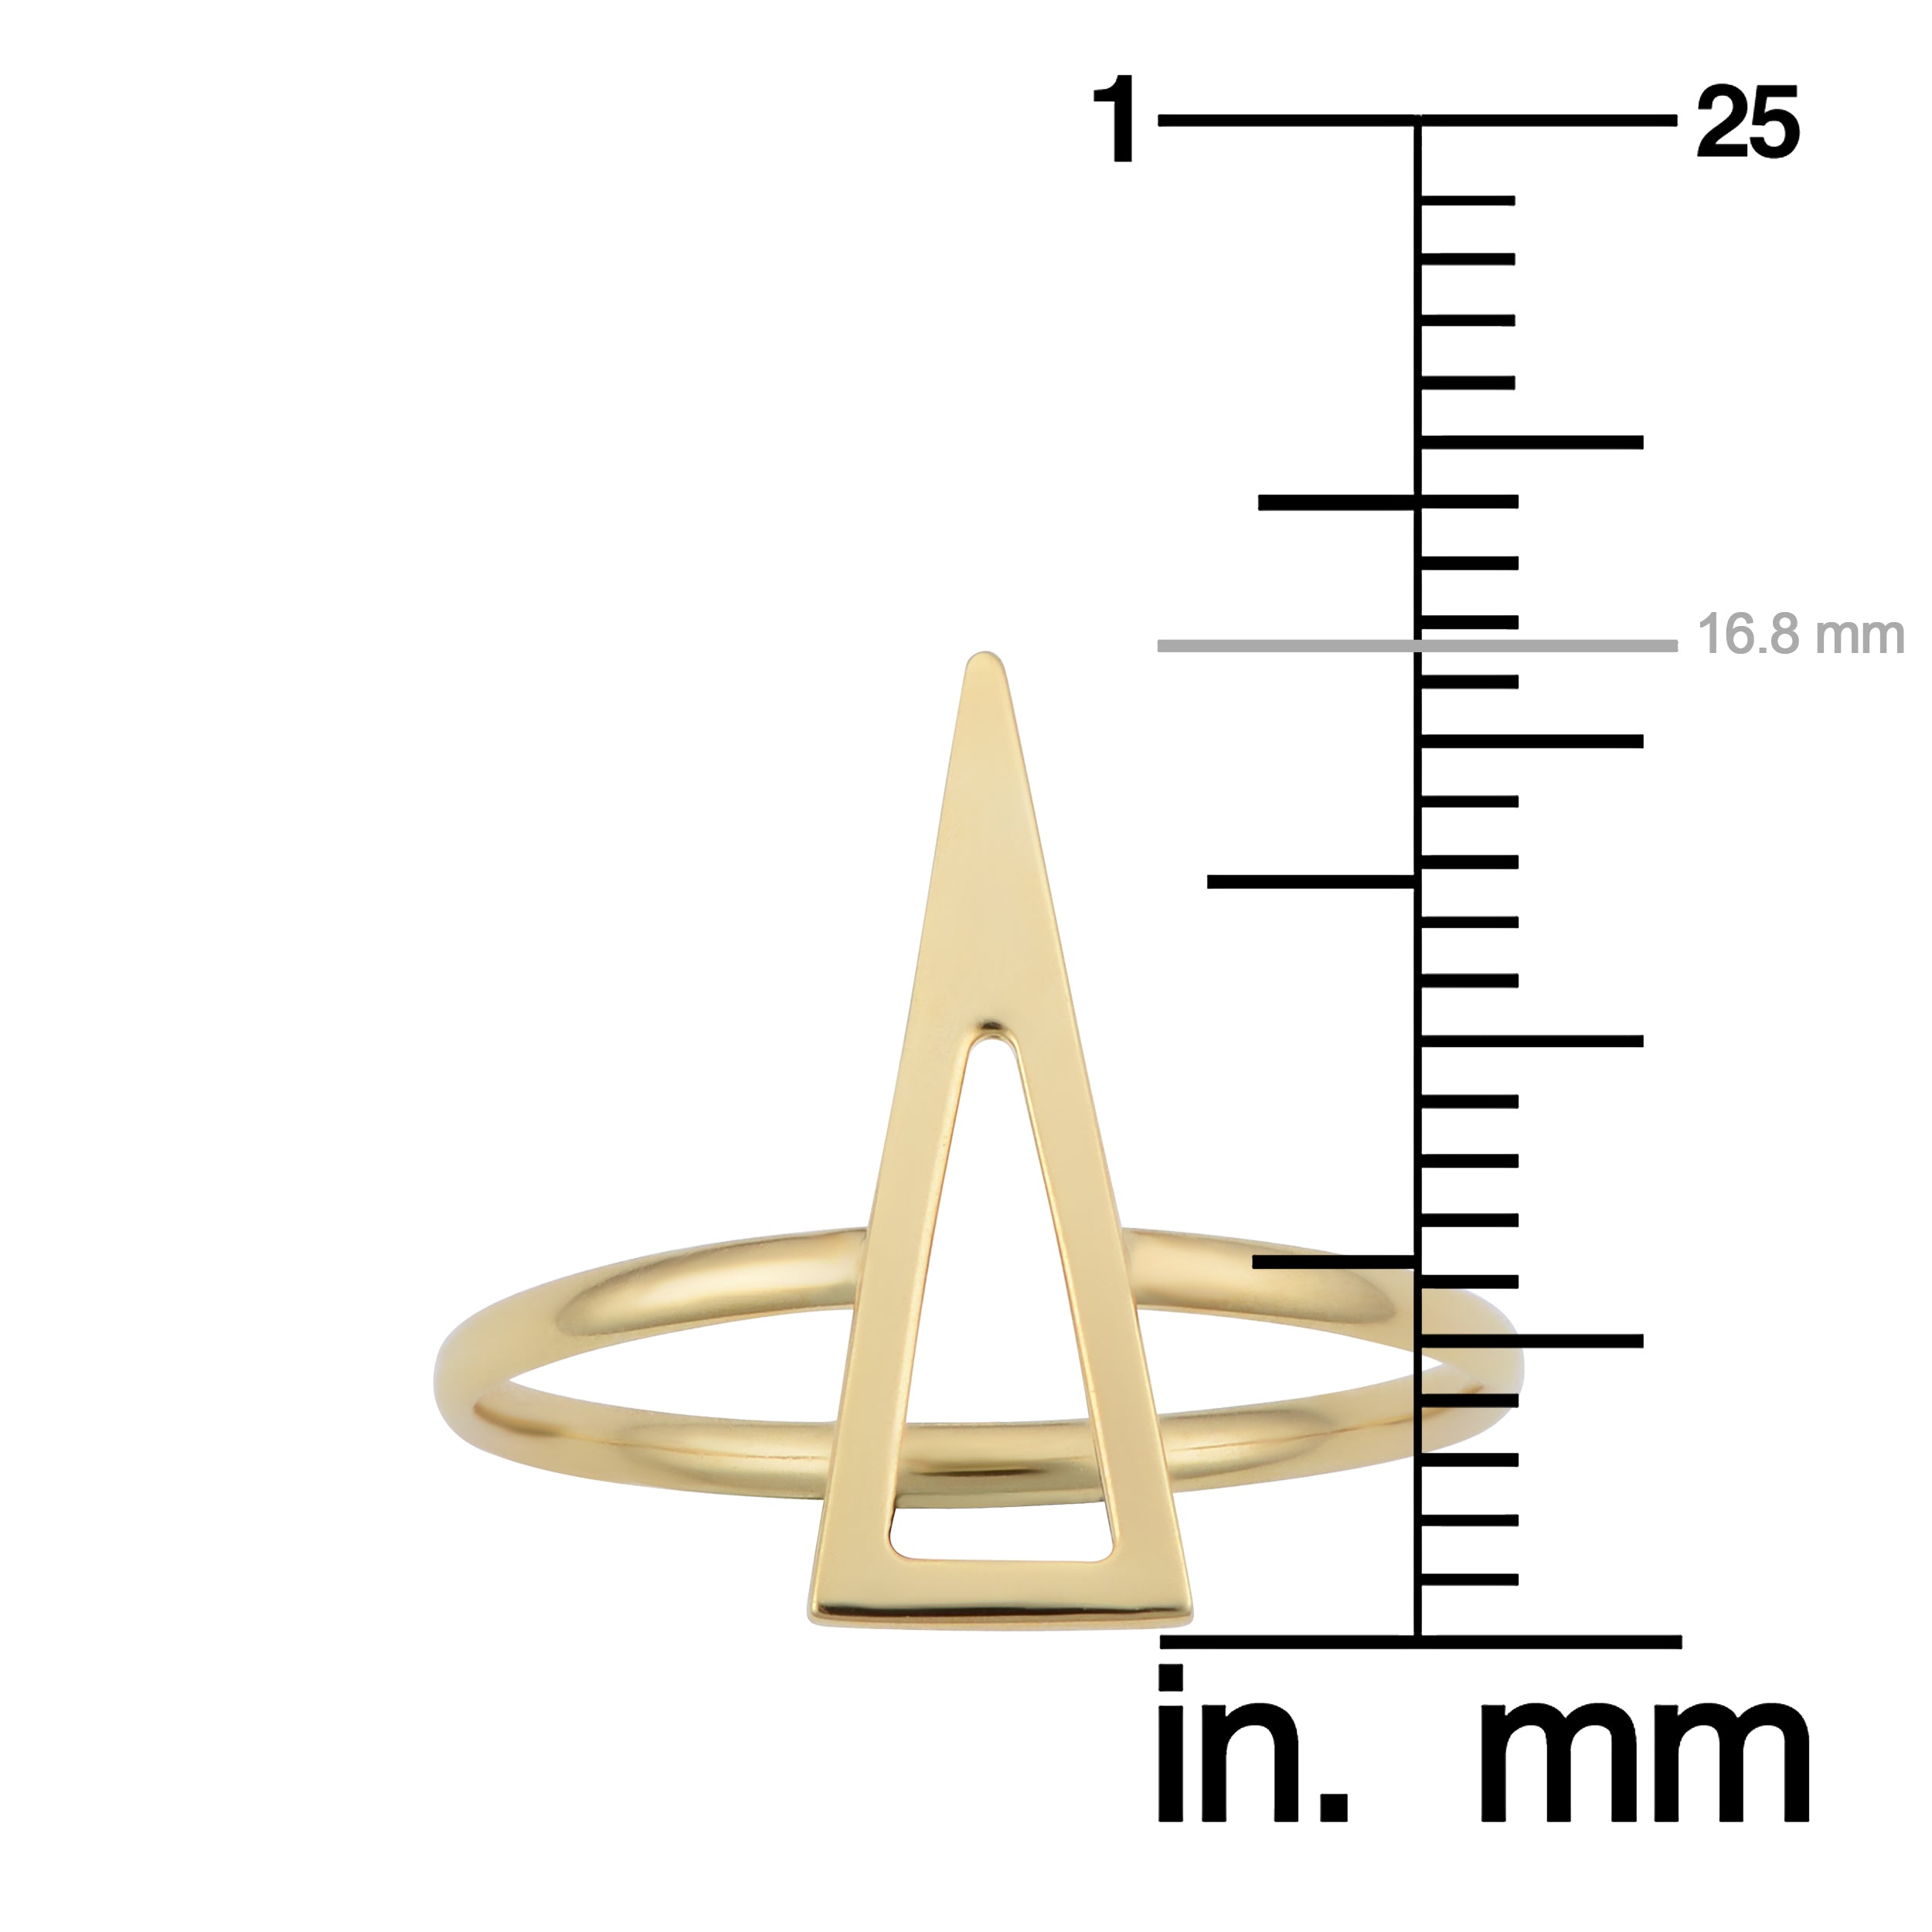 14k Yellow Gold Triangle Shape Ring